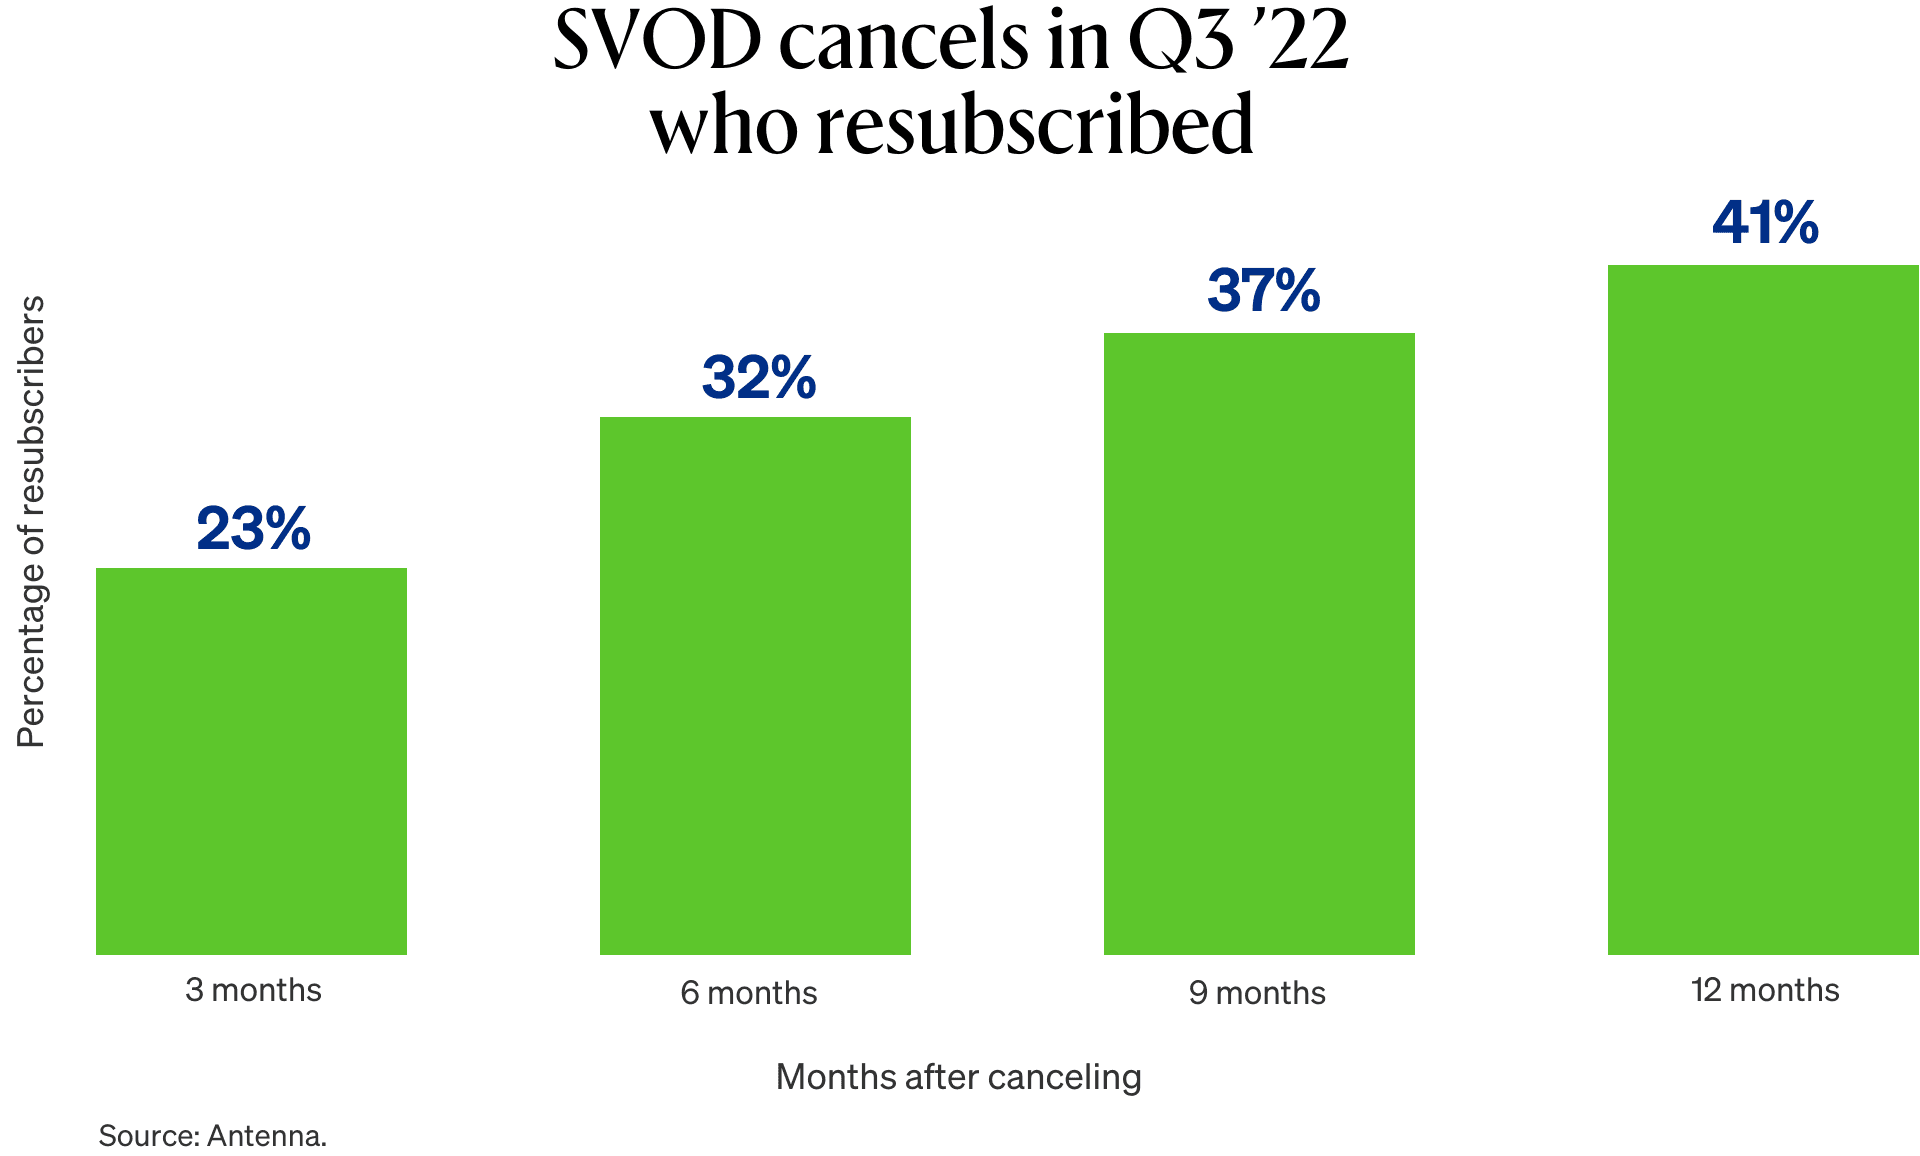 The Readout graph: SVOD cancels in Q3 '22 that resubscribed showing resubscriptions after 3, 6, 9, and 12 months.